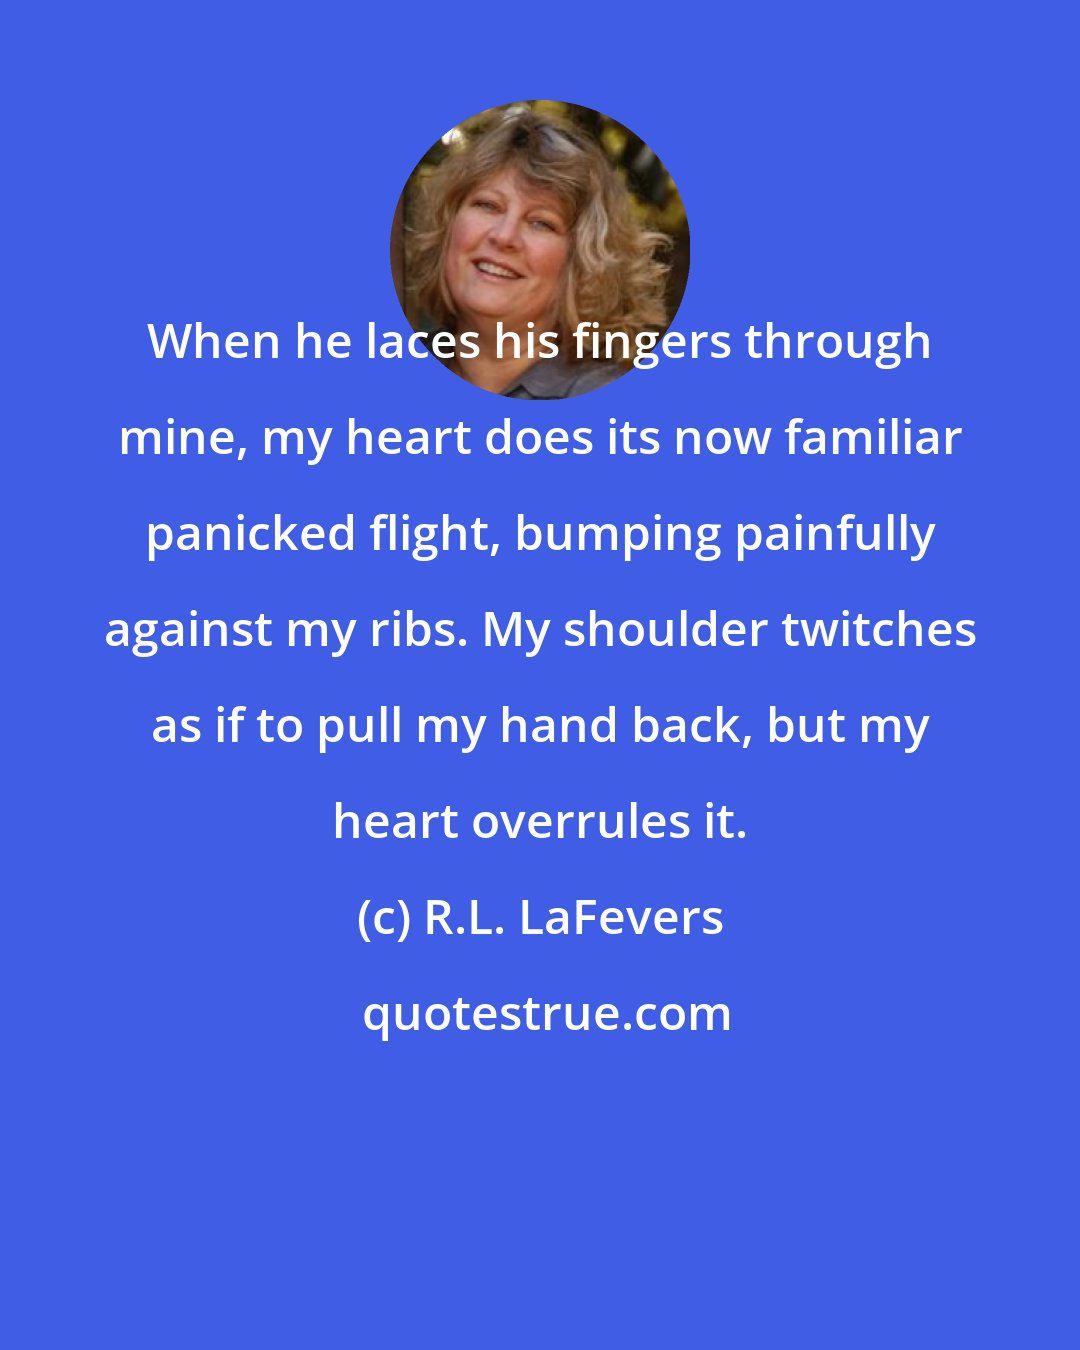 R.L. LaFevers: When he laces his fingers through mine, my heart does its now familiar panicked flight, bumping painfully against my ribs. My shoulder twitches as if to pull my hand back, but my heart overrules it.